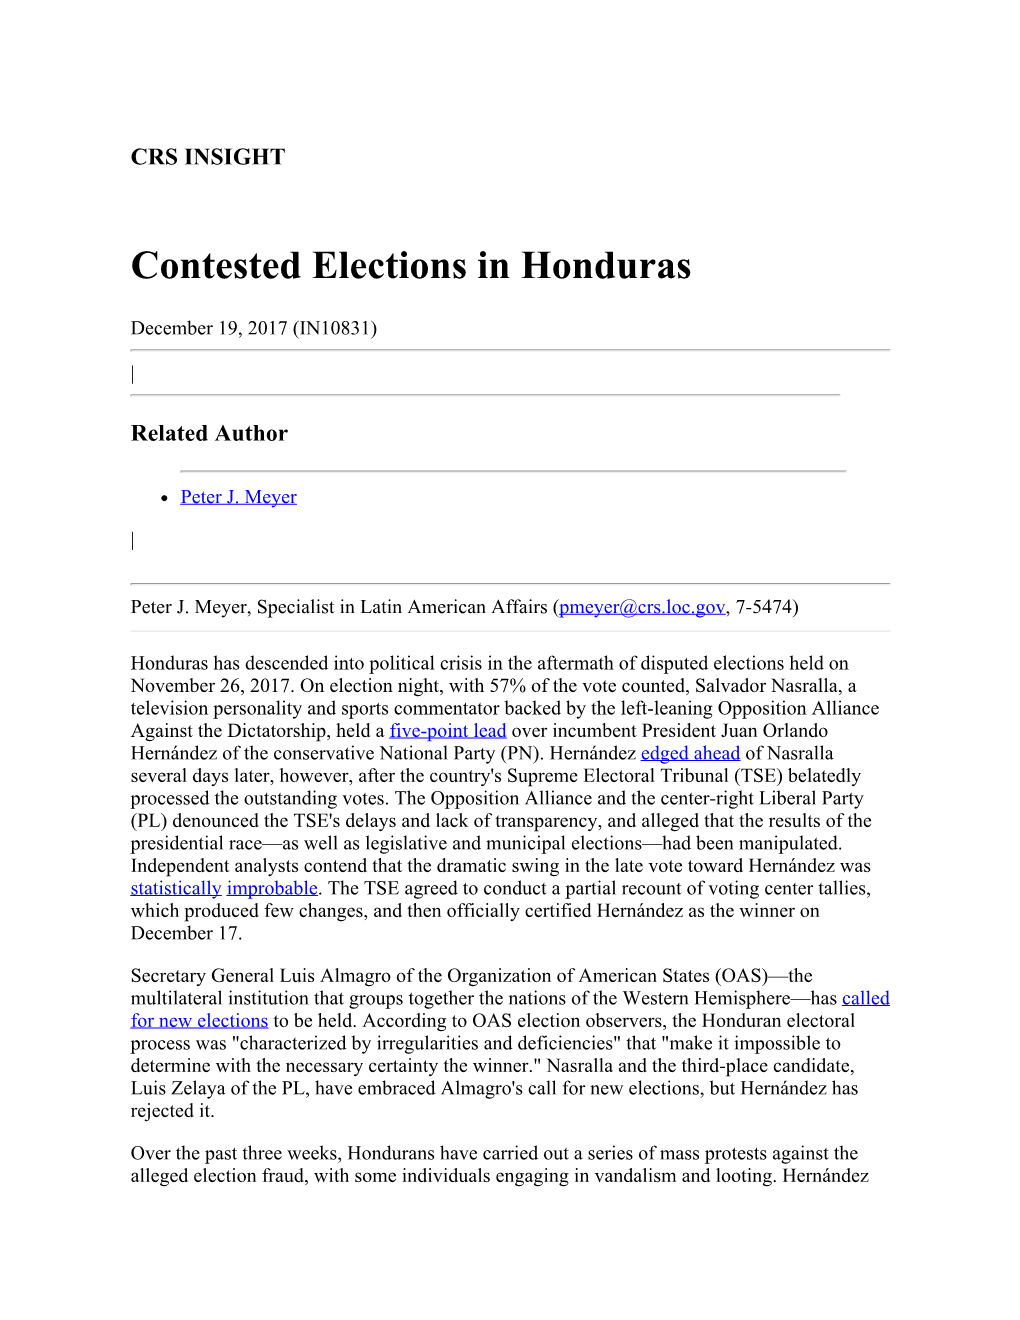 Contested Elections in Honduras